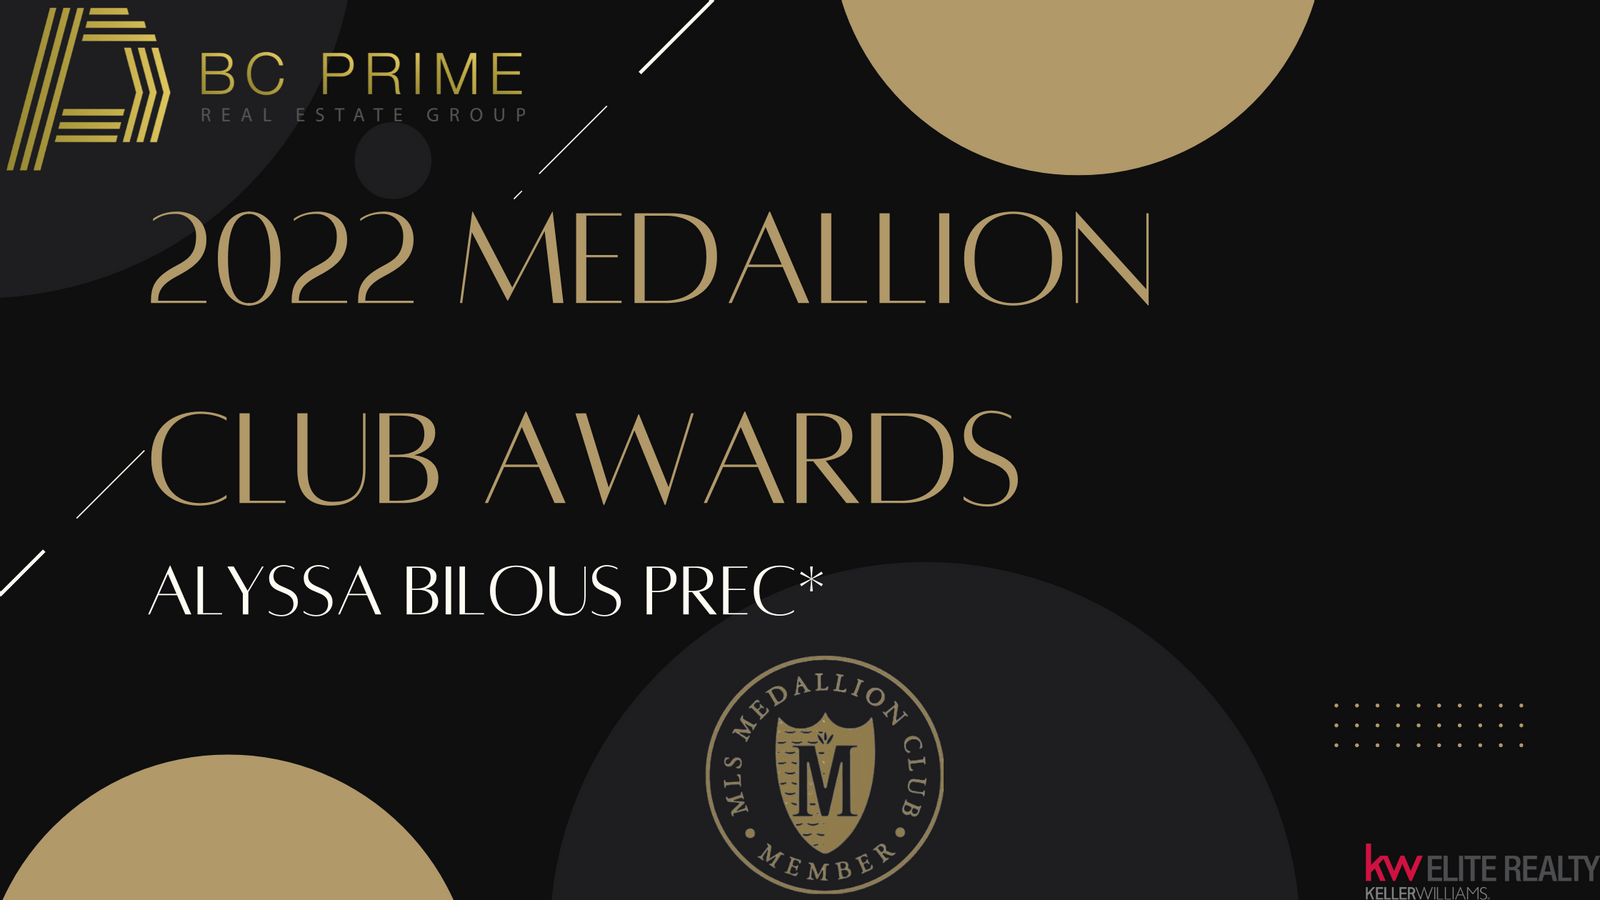 Congratulations to our Real Estate Specialist 2022 Medallion Club Award